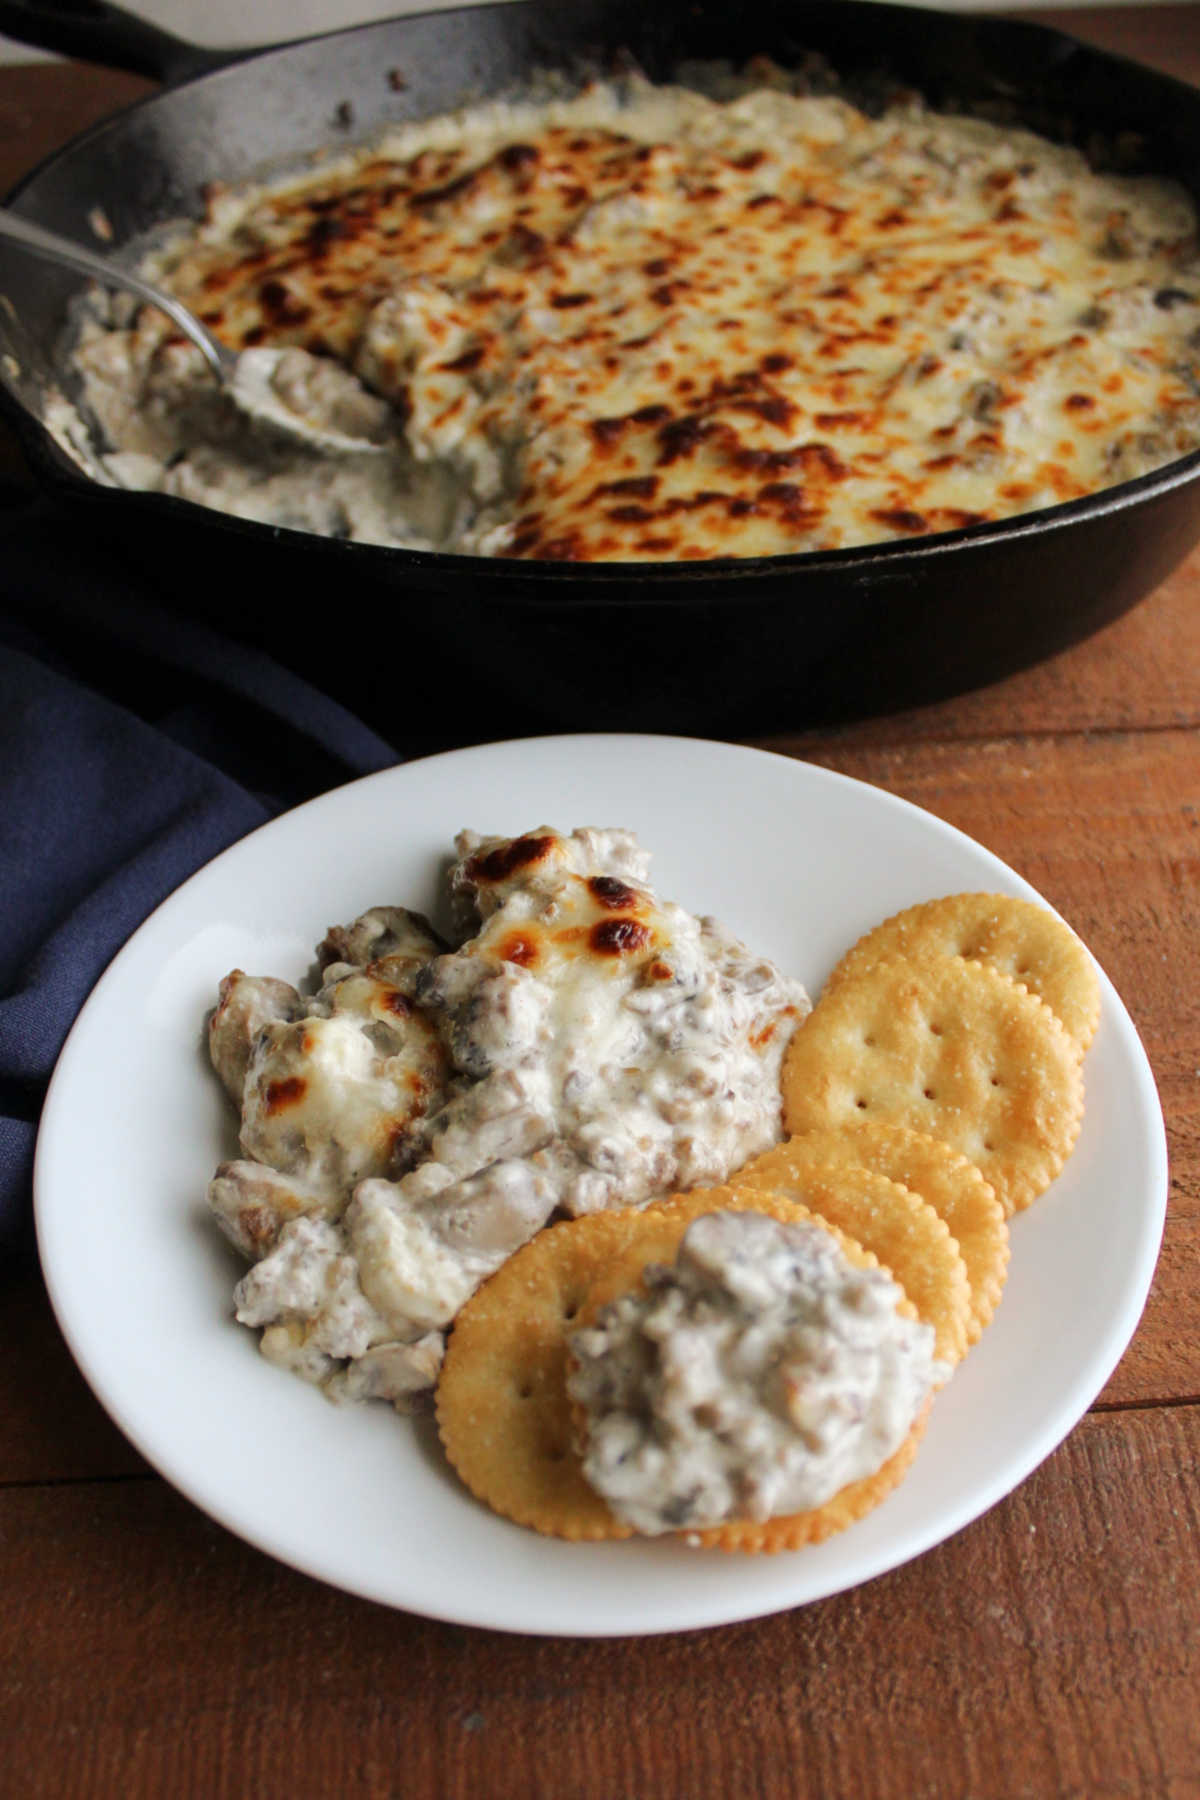 Stuffed mushroom dip served on small dip with crackers, ready to eat.